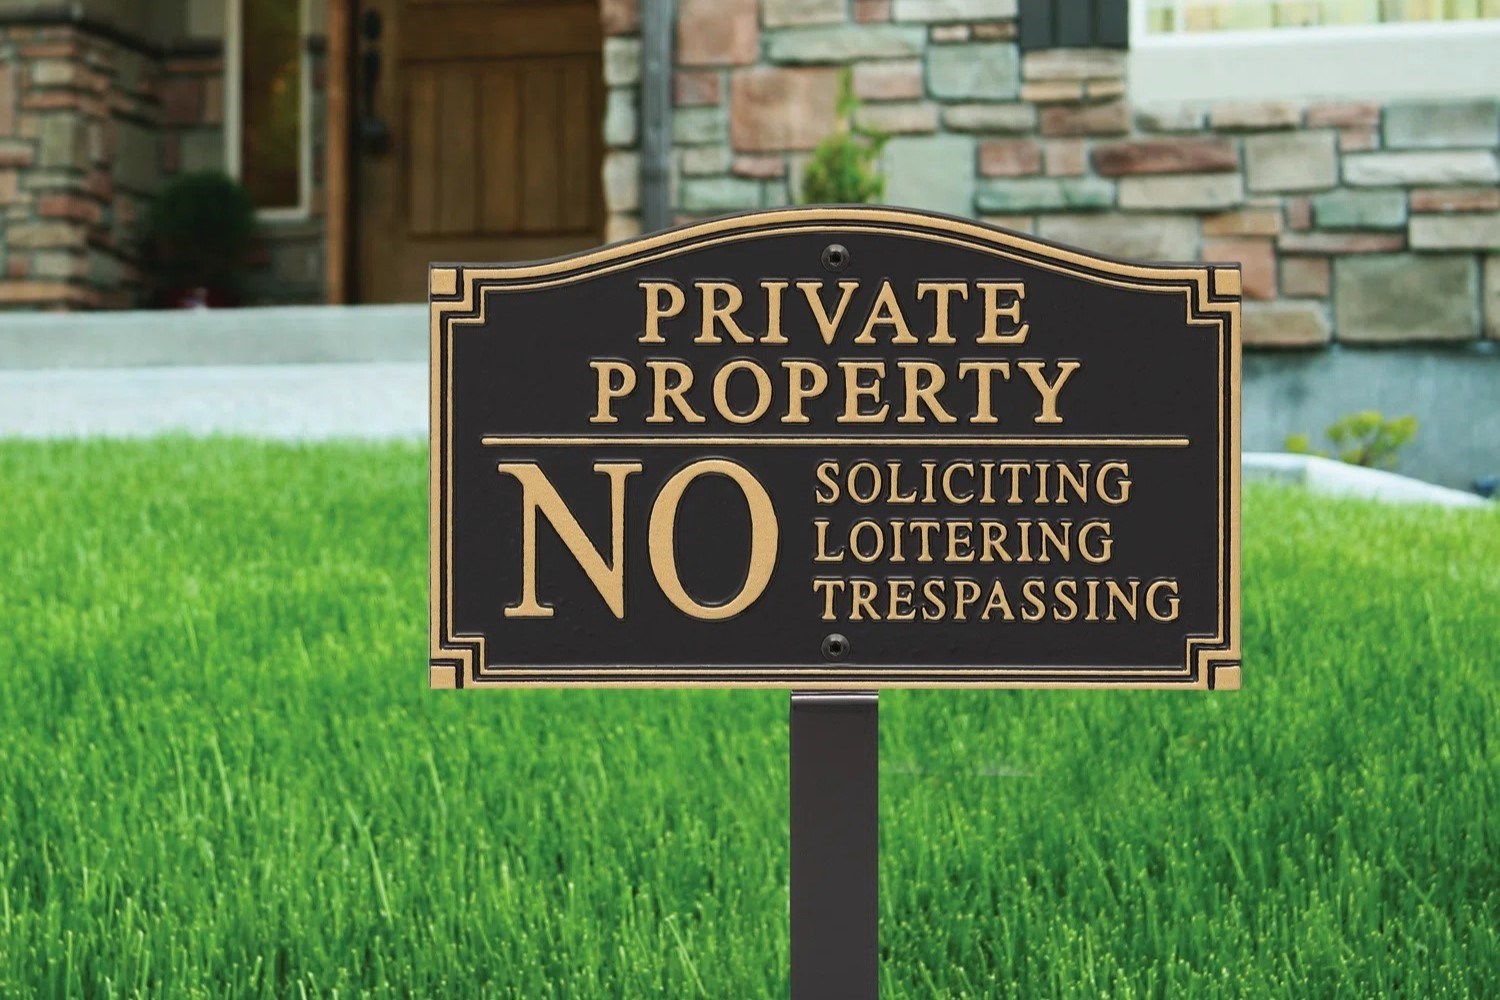 The Hidden Meaning Behind “No Soliciting” Signs In Neighborhoods